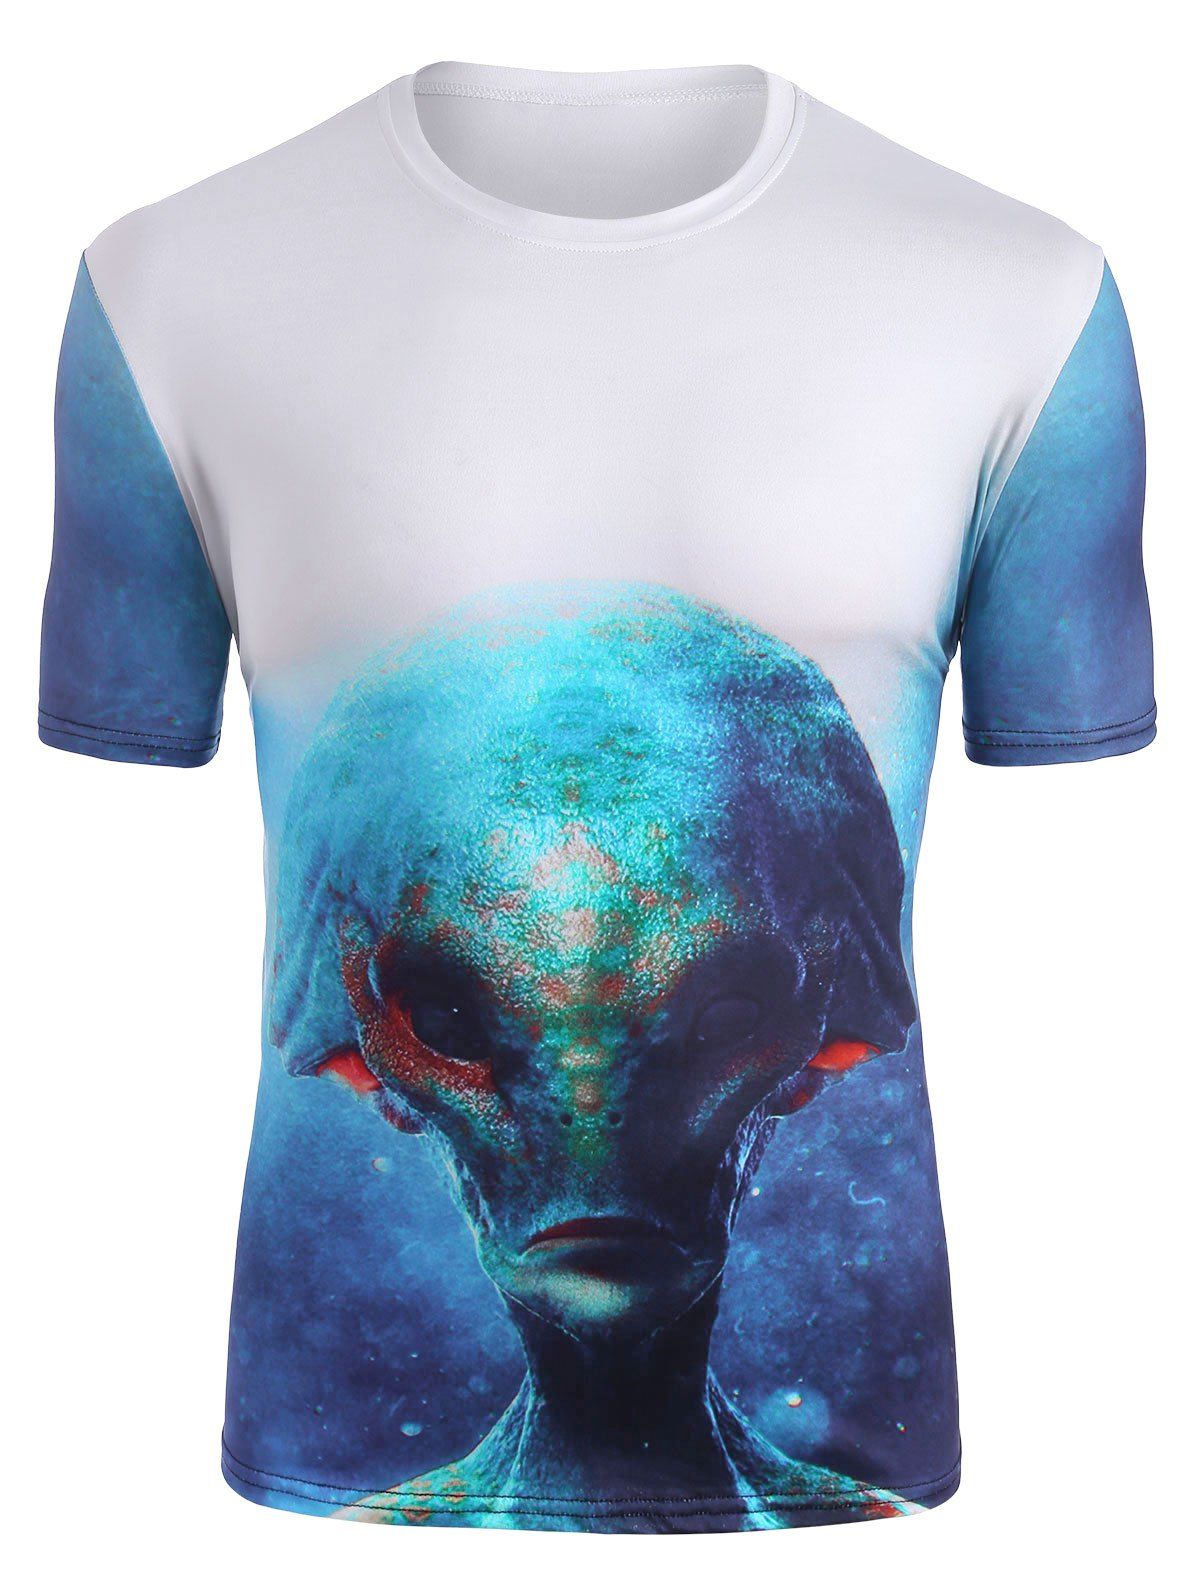 Abstract Alien Graphic Crew Neck Casual T Shirt - multicolor 3XL